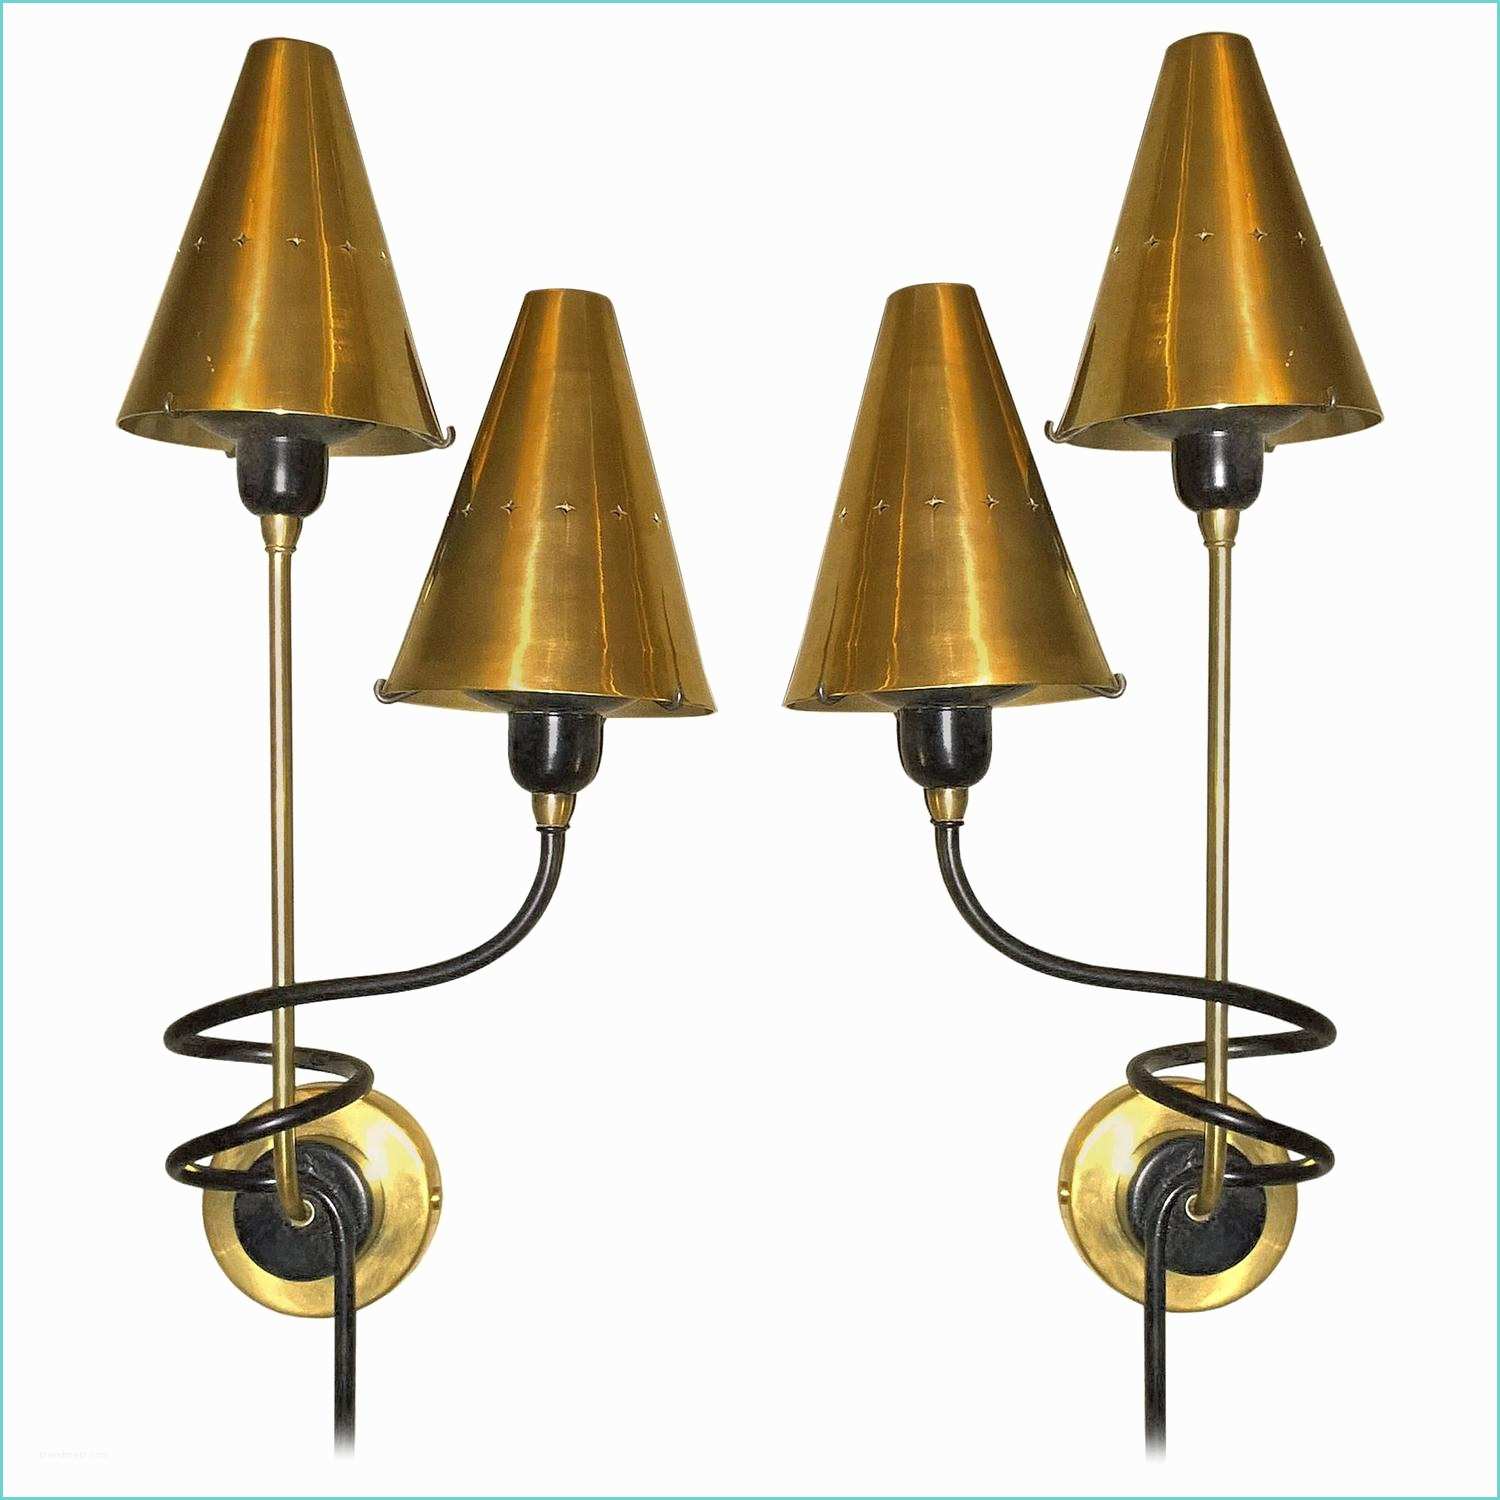 Midcentury Wall Sconce Pair Mid Century Modern Stilnovo Sconces for Sale at 1stdibs